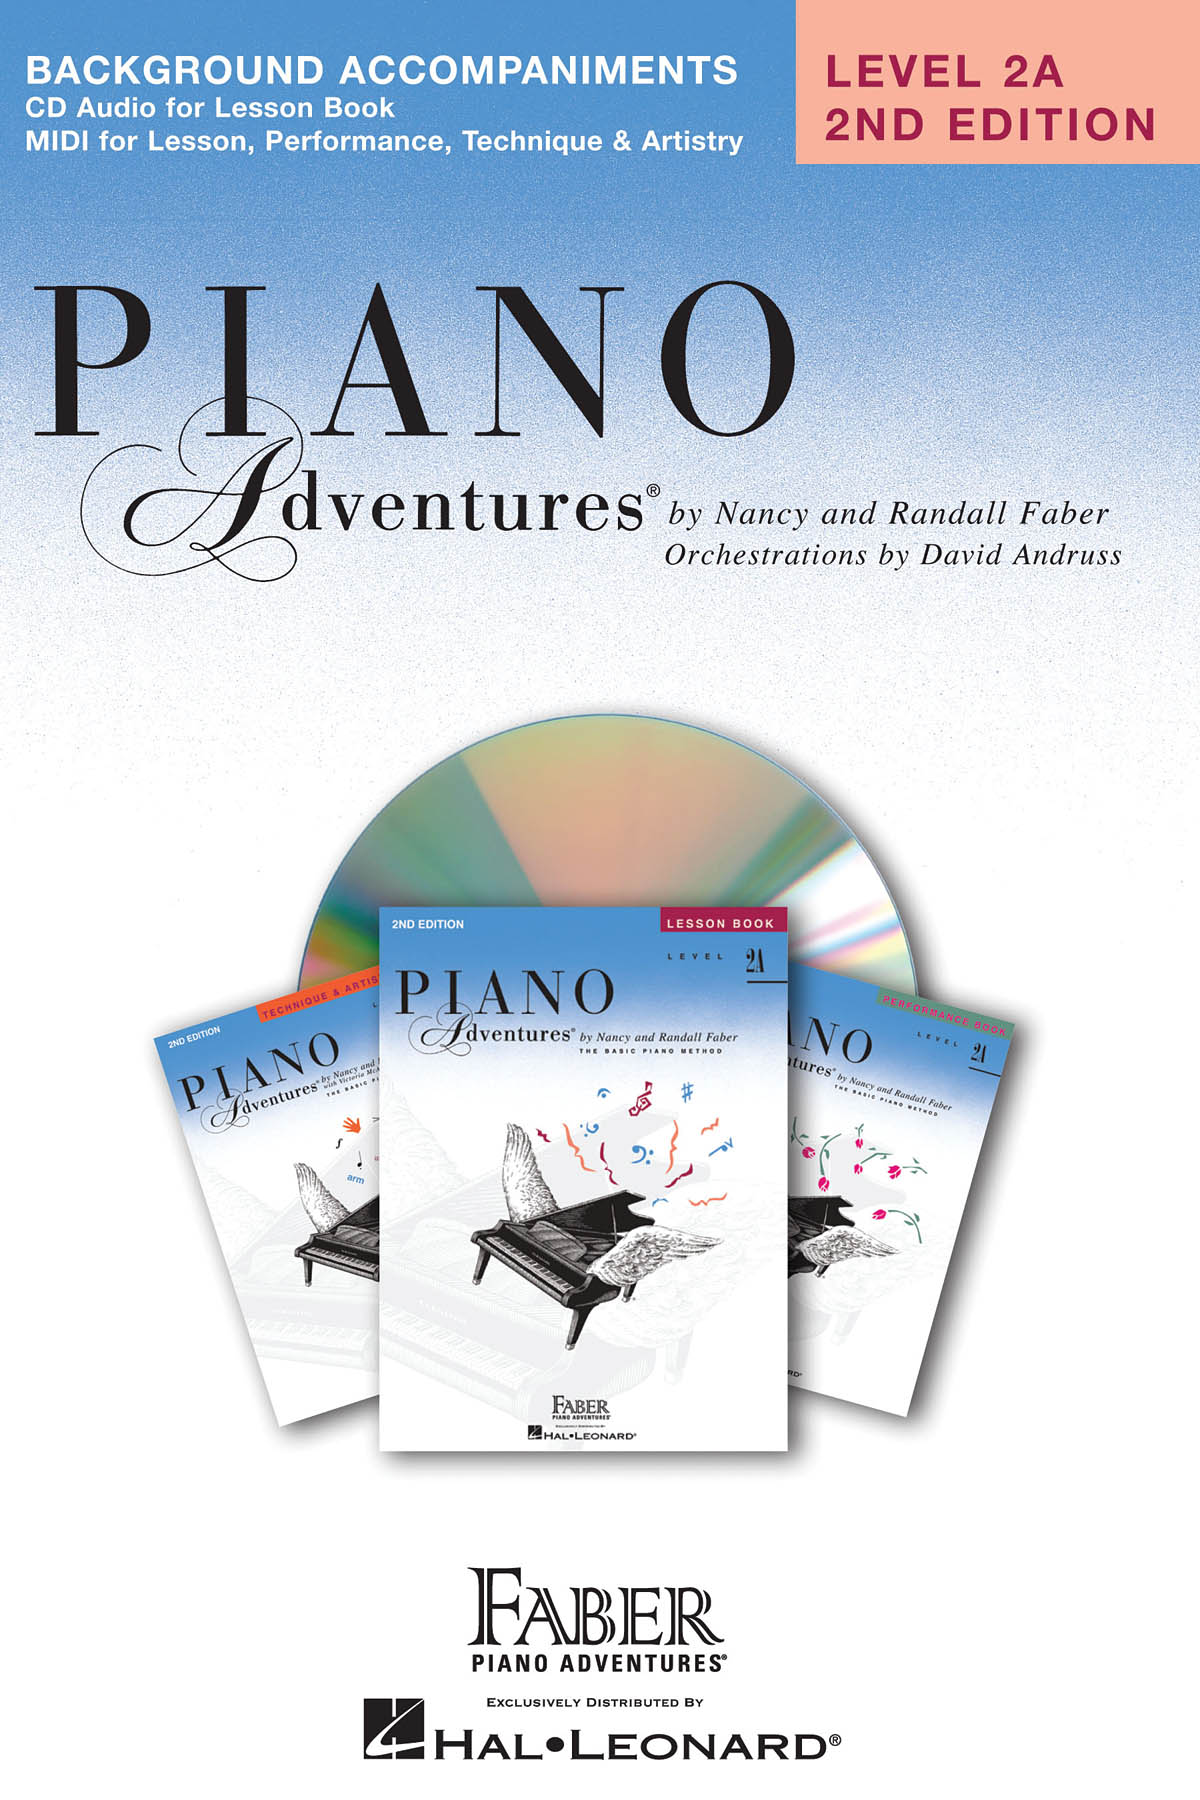 Piano Adventures Level 2A - Lesson Book CD - 2nd Edition